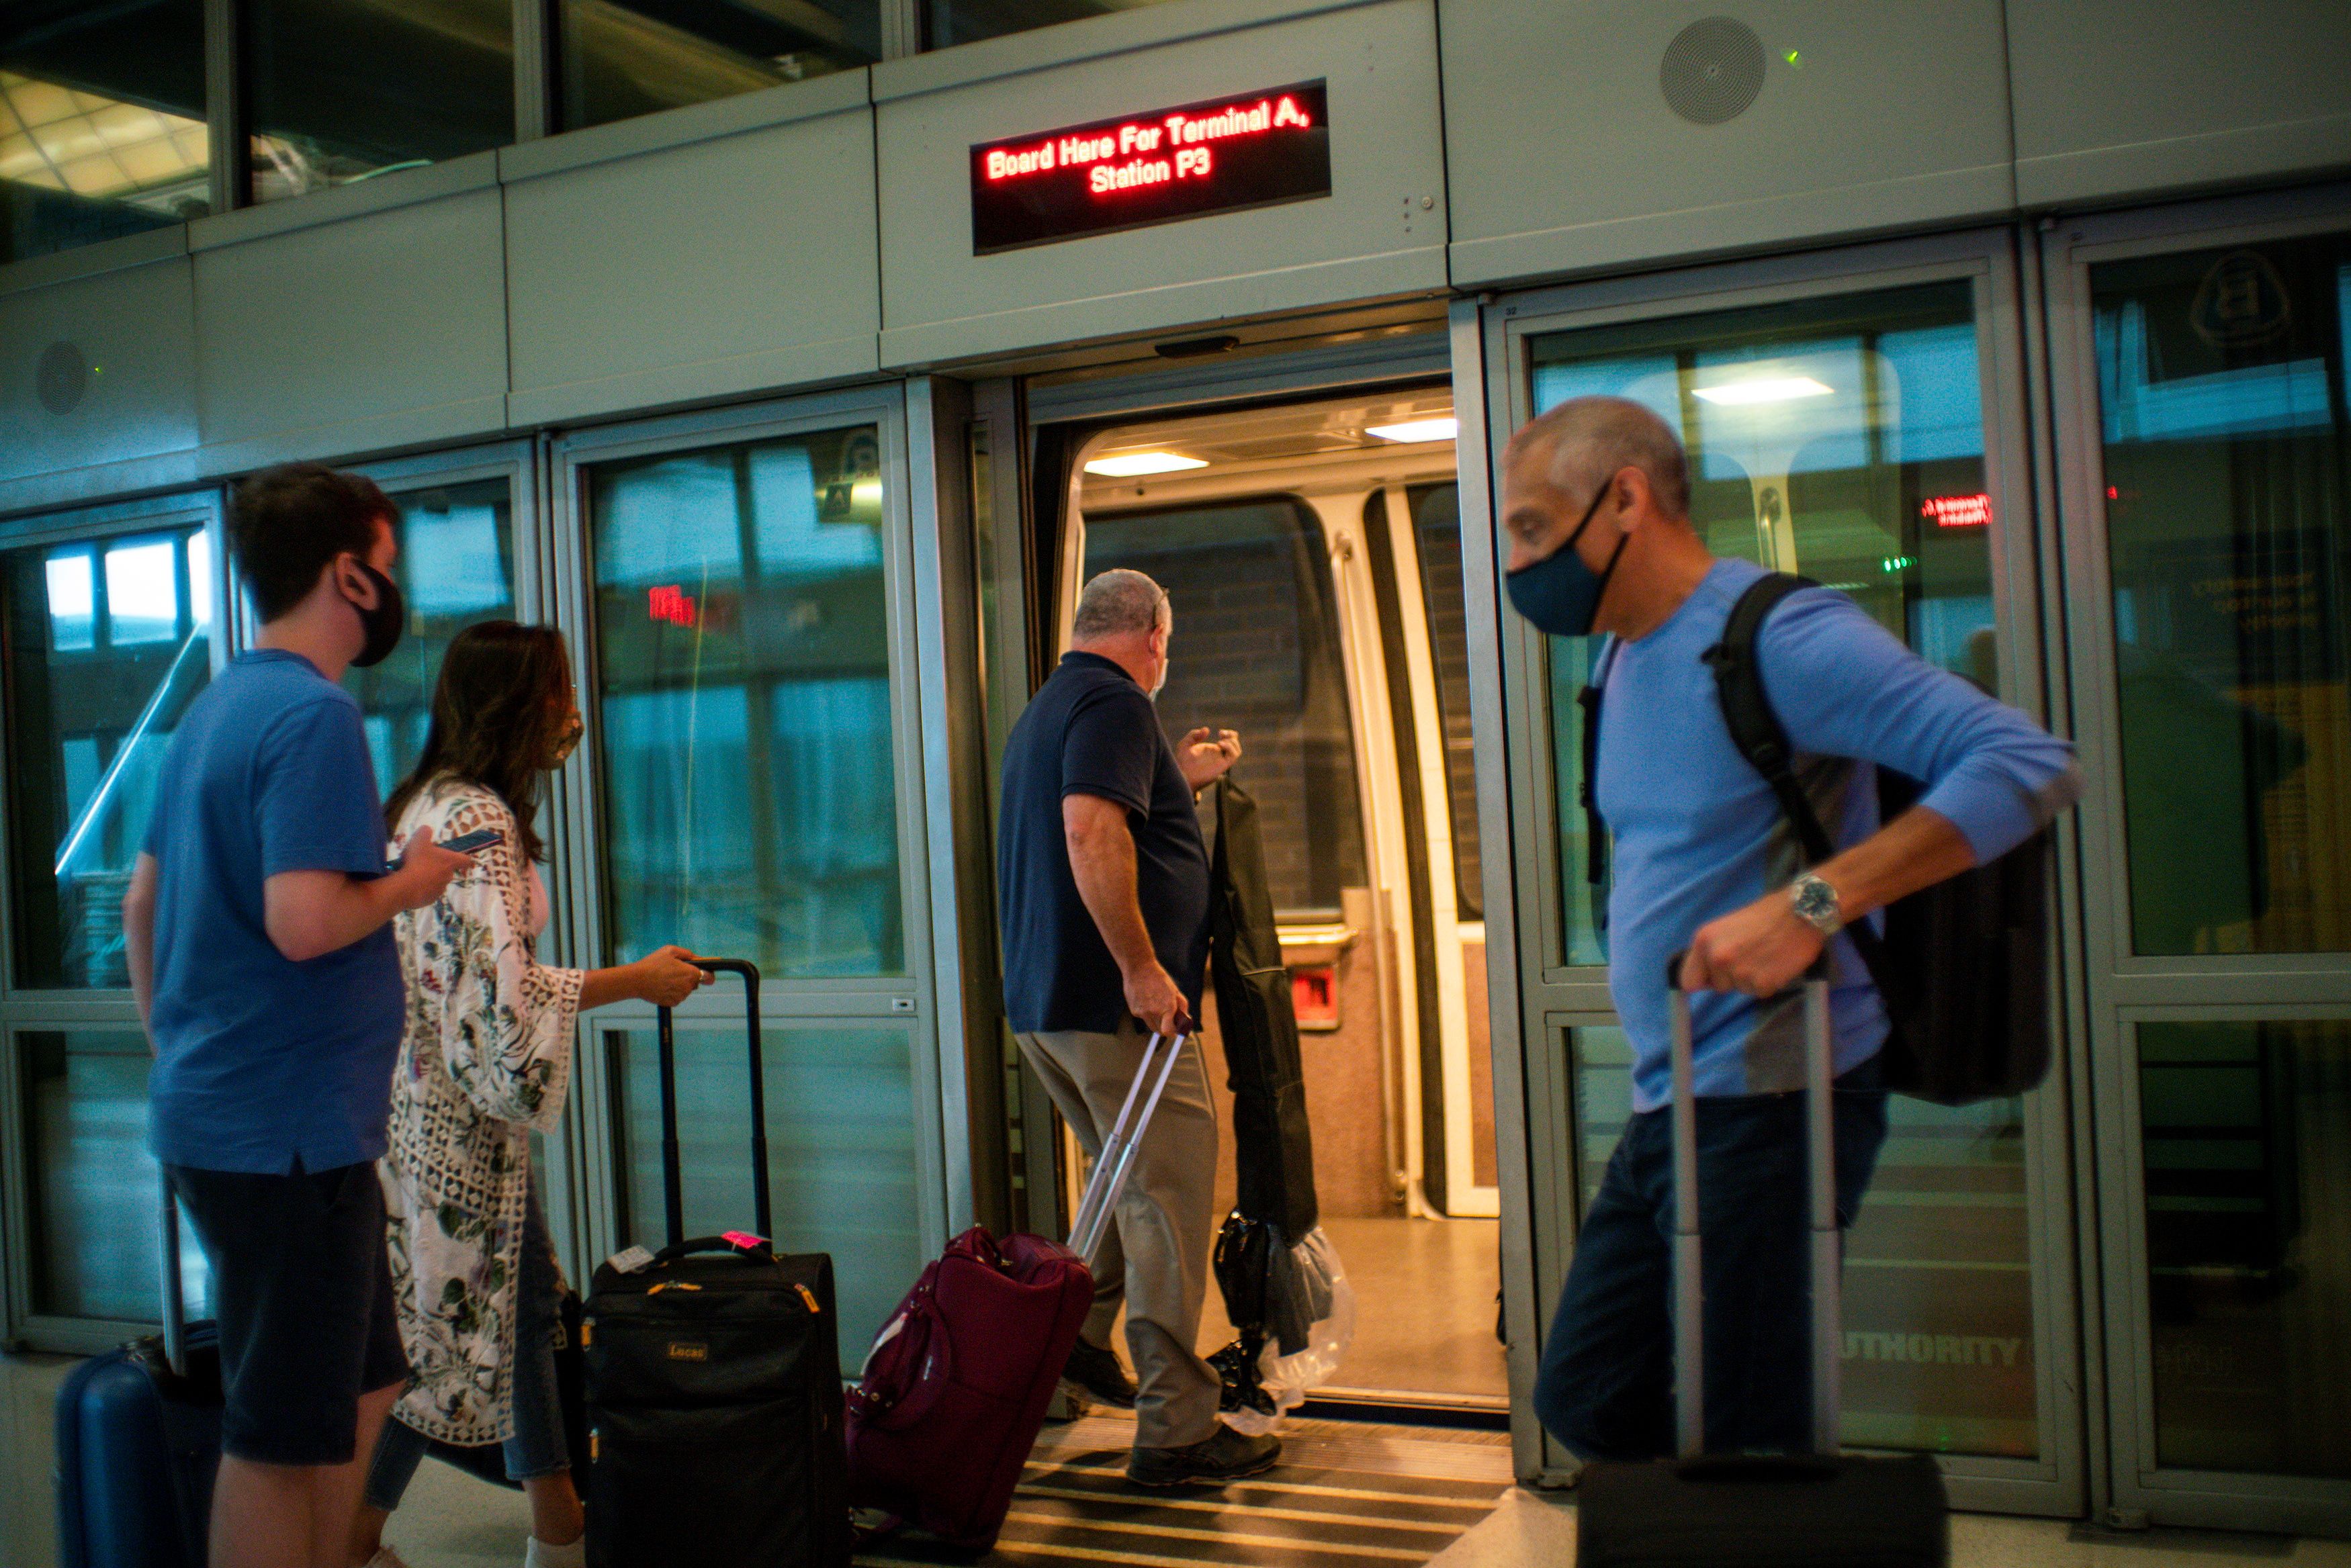 Travelers board the air train ahead of the July 4th holiday, at the Newark Liberty International Airport, in Newark, New Jersey